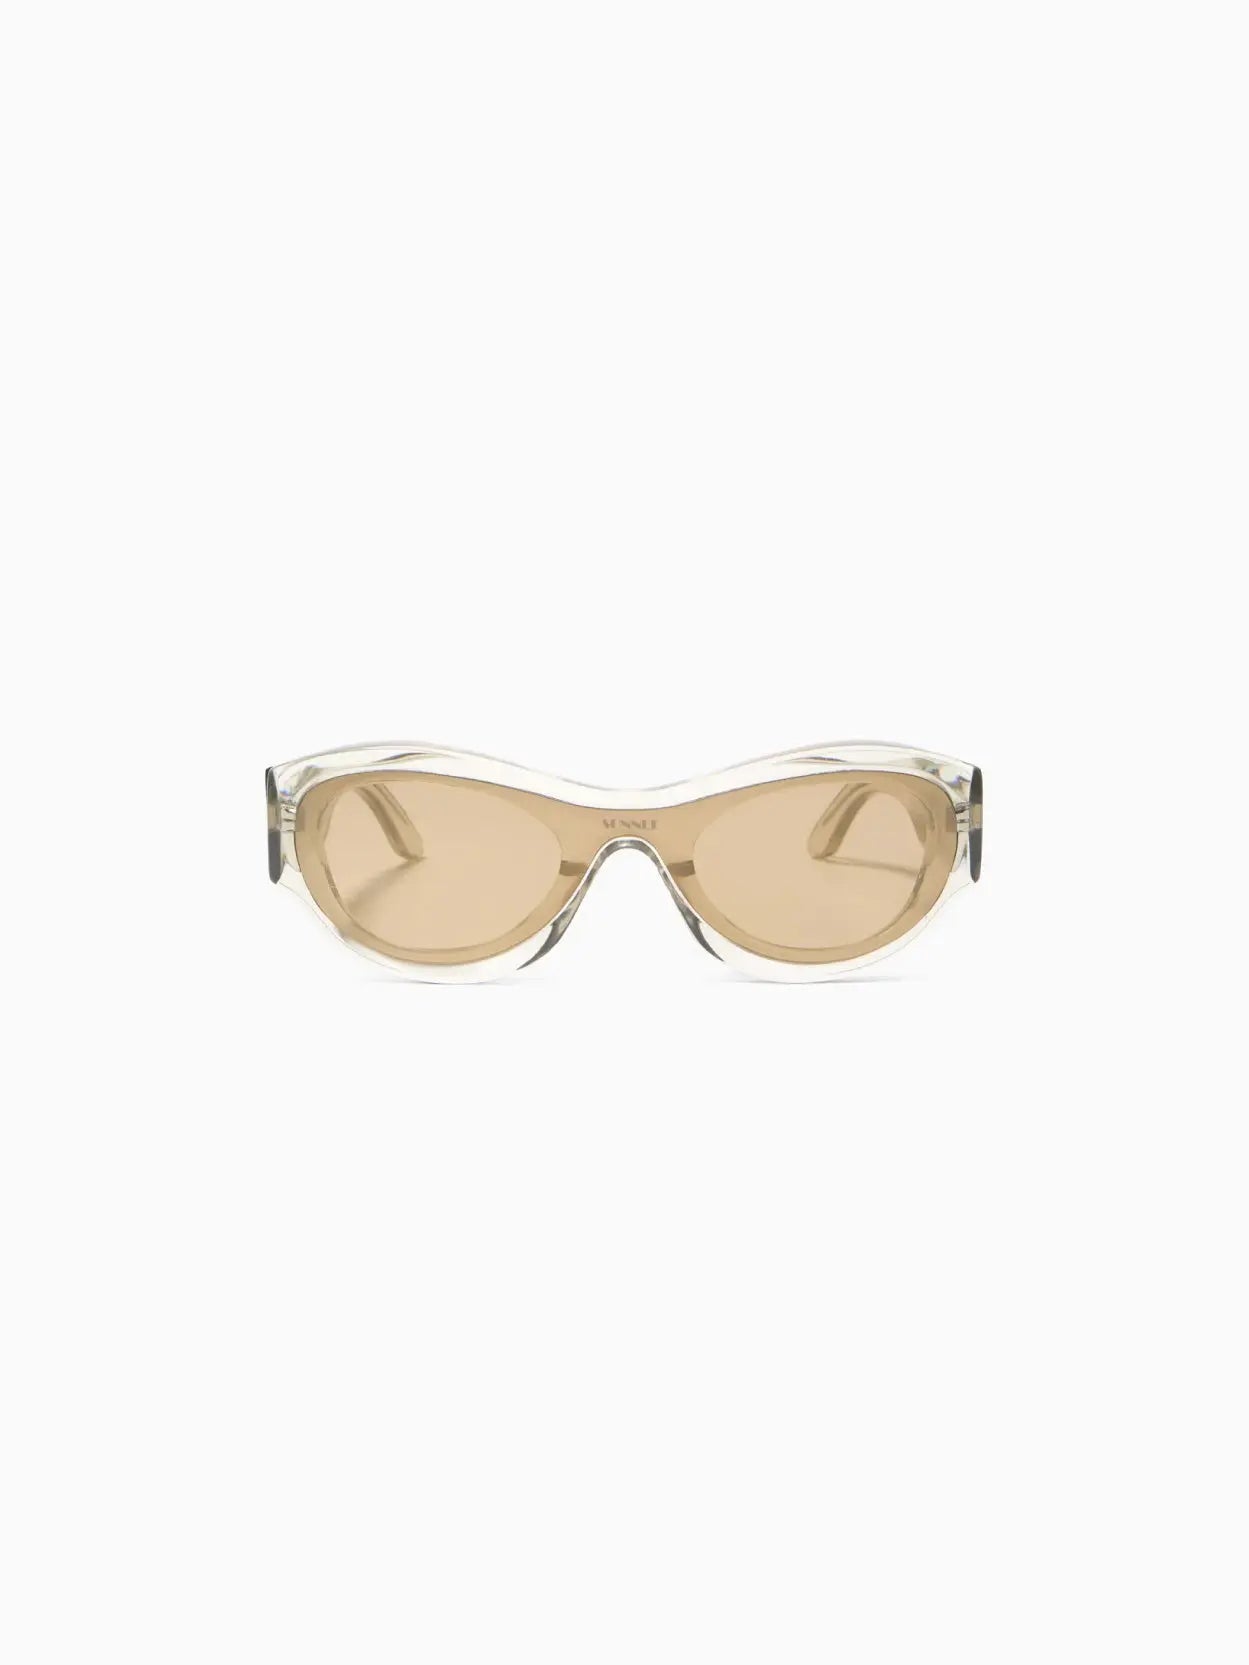 A pair of Sunnei Prototipo 5 Sunglasses Transparent Grey/Green featuring light tan lenses and a transparent frame, available exclusively at Bassalstore in Barcelona.